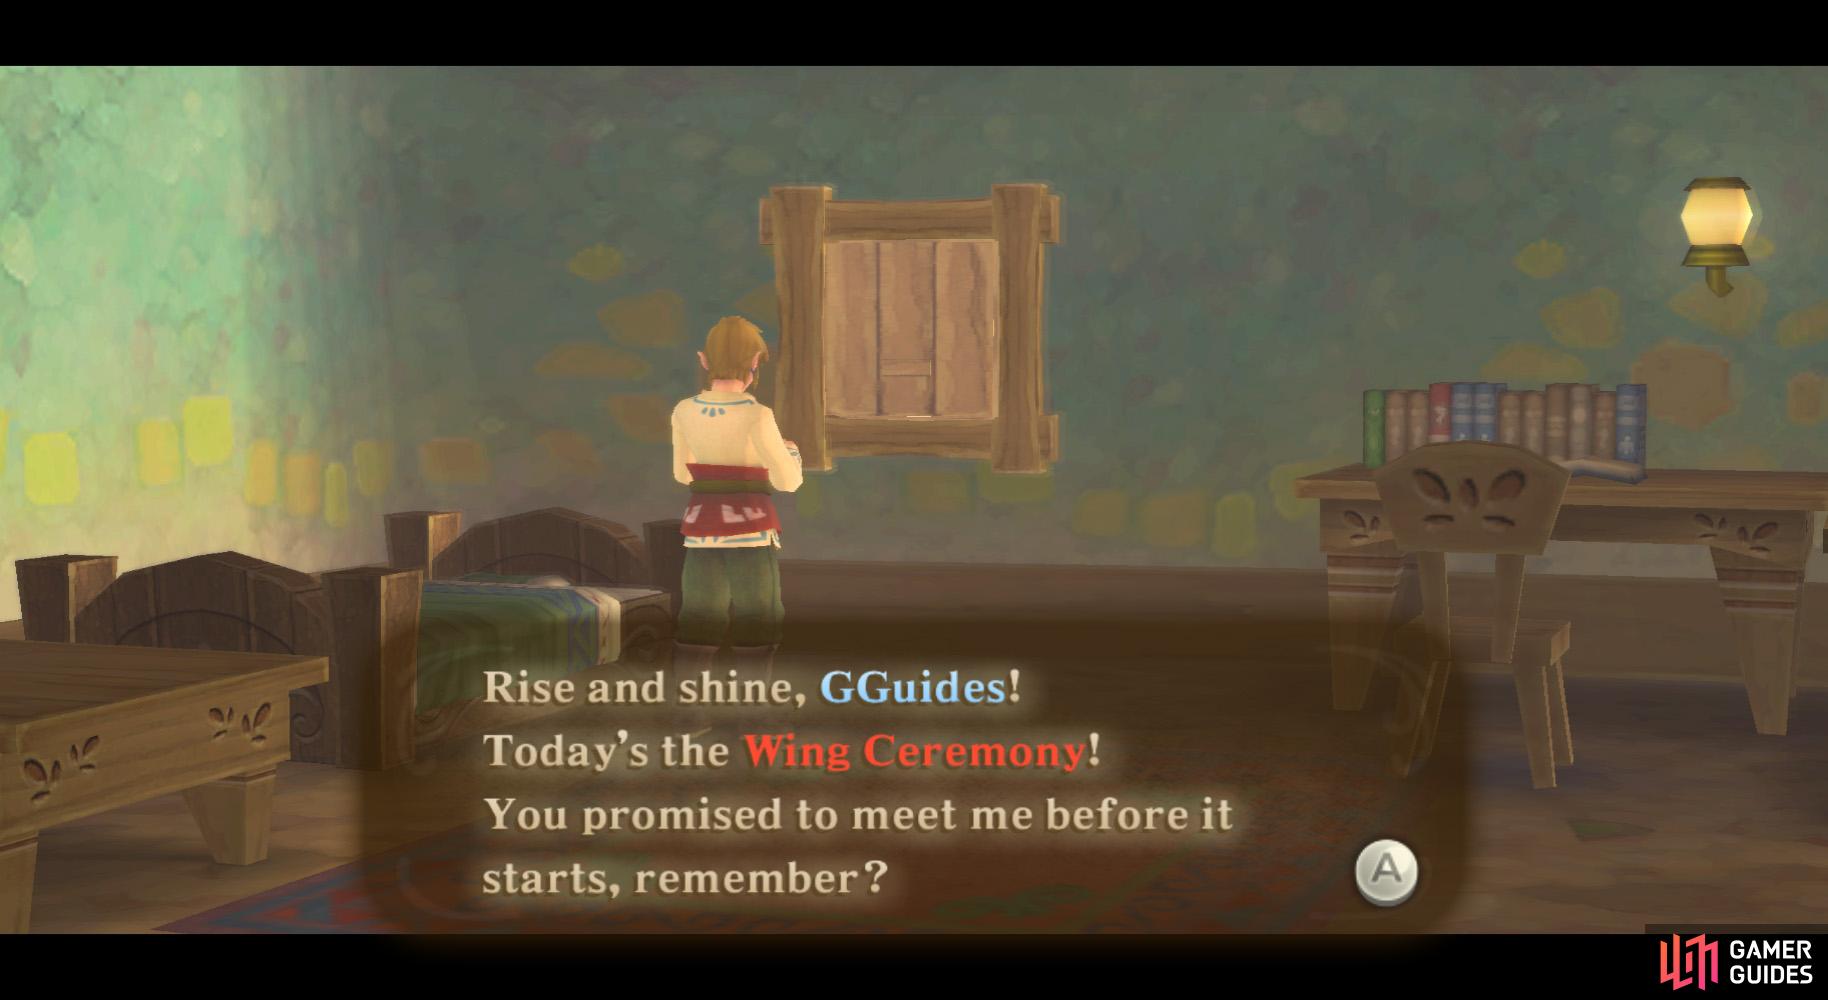 It's a reminder to meet Zelda for the Wing Ceremony!